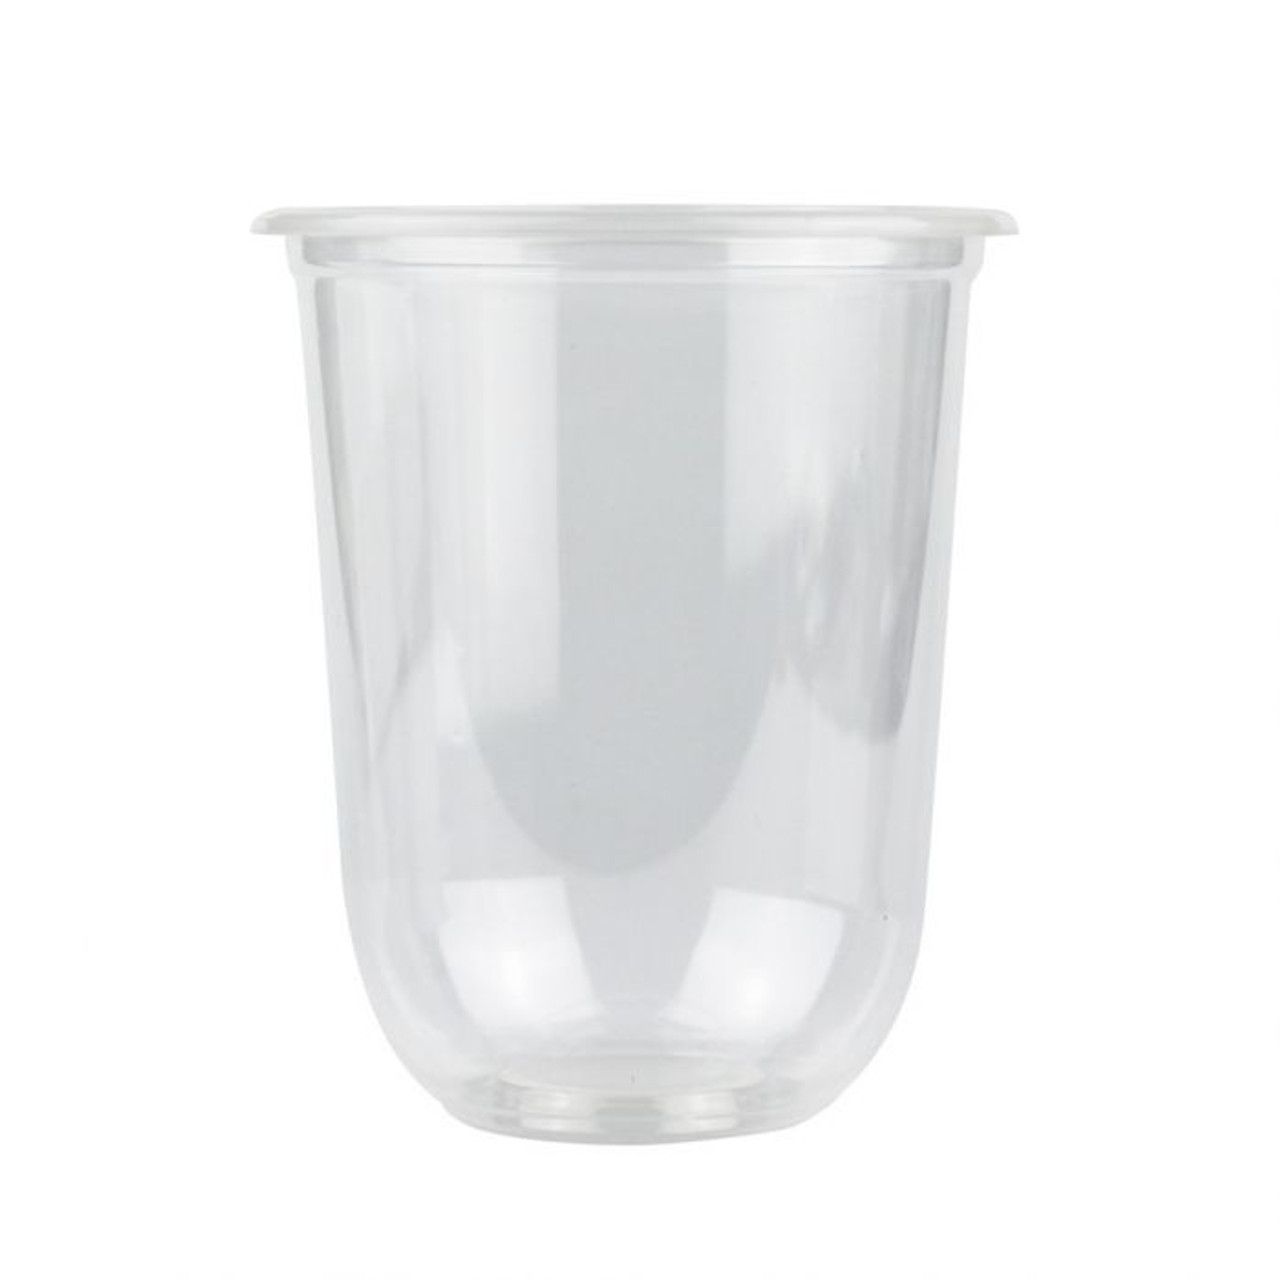 Q Cup 500ml Clear Round Bottom PP Cup (95mm) - 1 case (1000 piece)